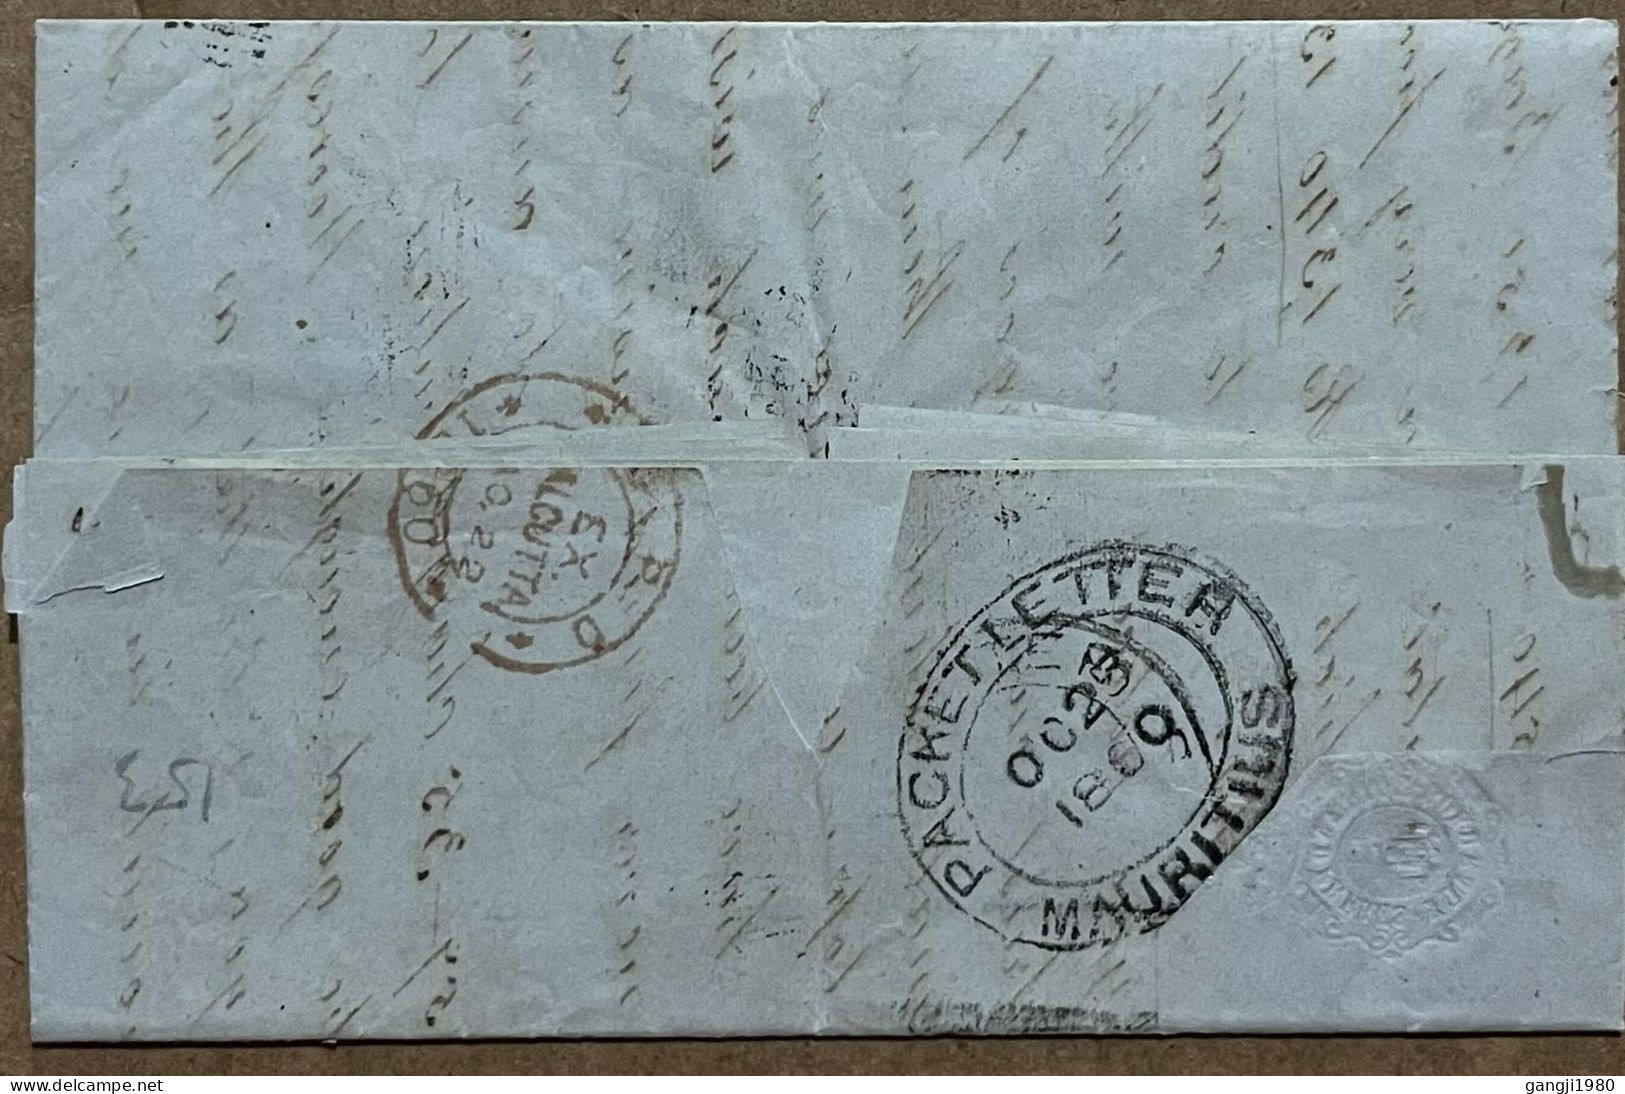 INDIA TO MAURITIUS 1860, INDIA PAID IN BOX, PACKET LETTER MAURITIUS & CALCUTTA RED CANCEL, STEAMER BENGAL VIA ADEN HAND - 1858-79 Kronenkolonie